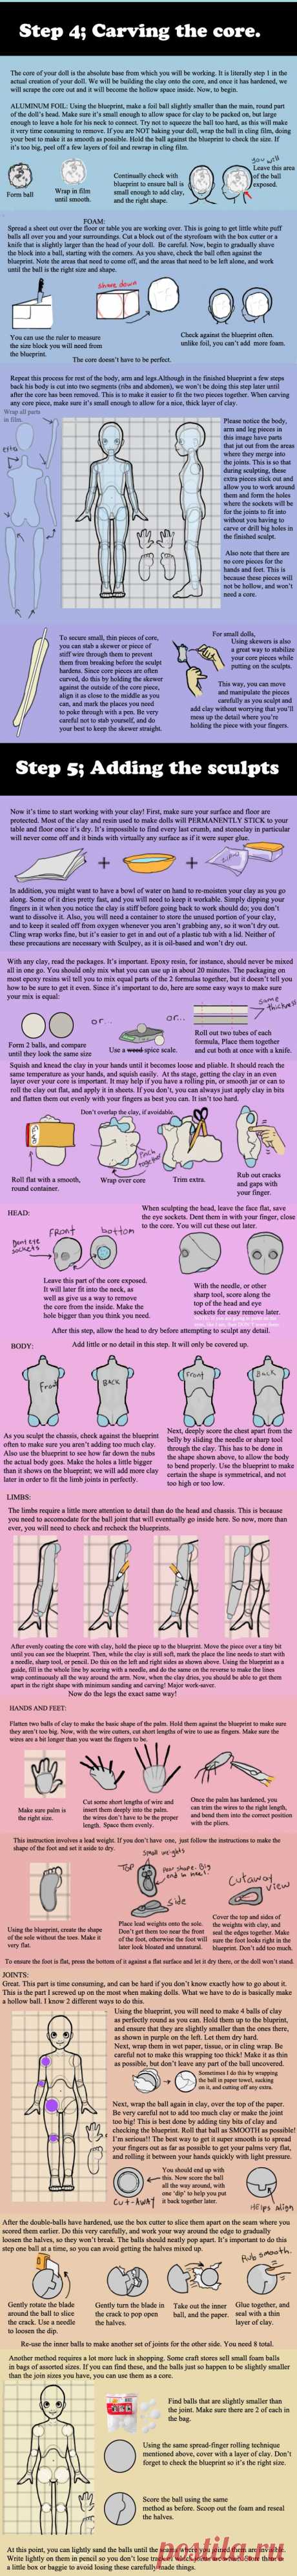 Ball jointed doll tutorial part 3 by Deskleaves on DeviantArt